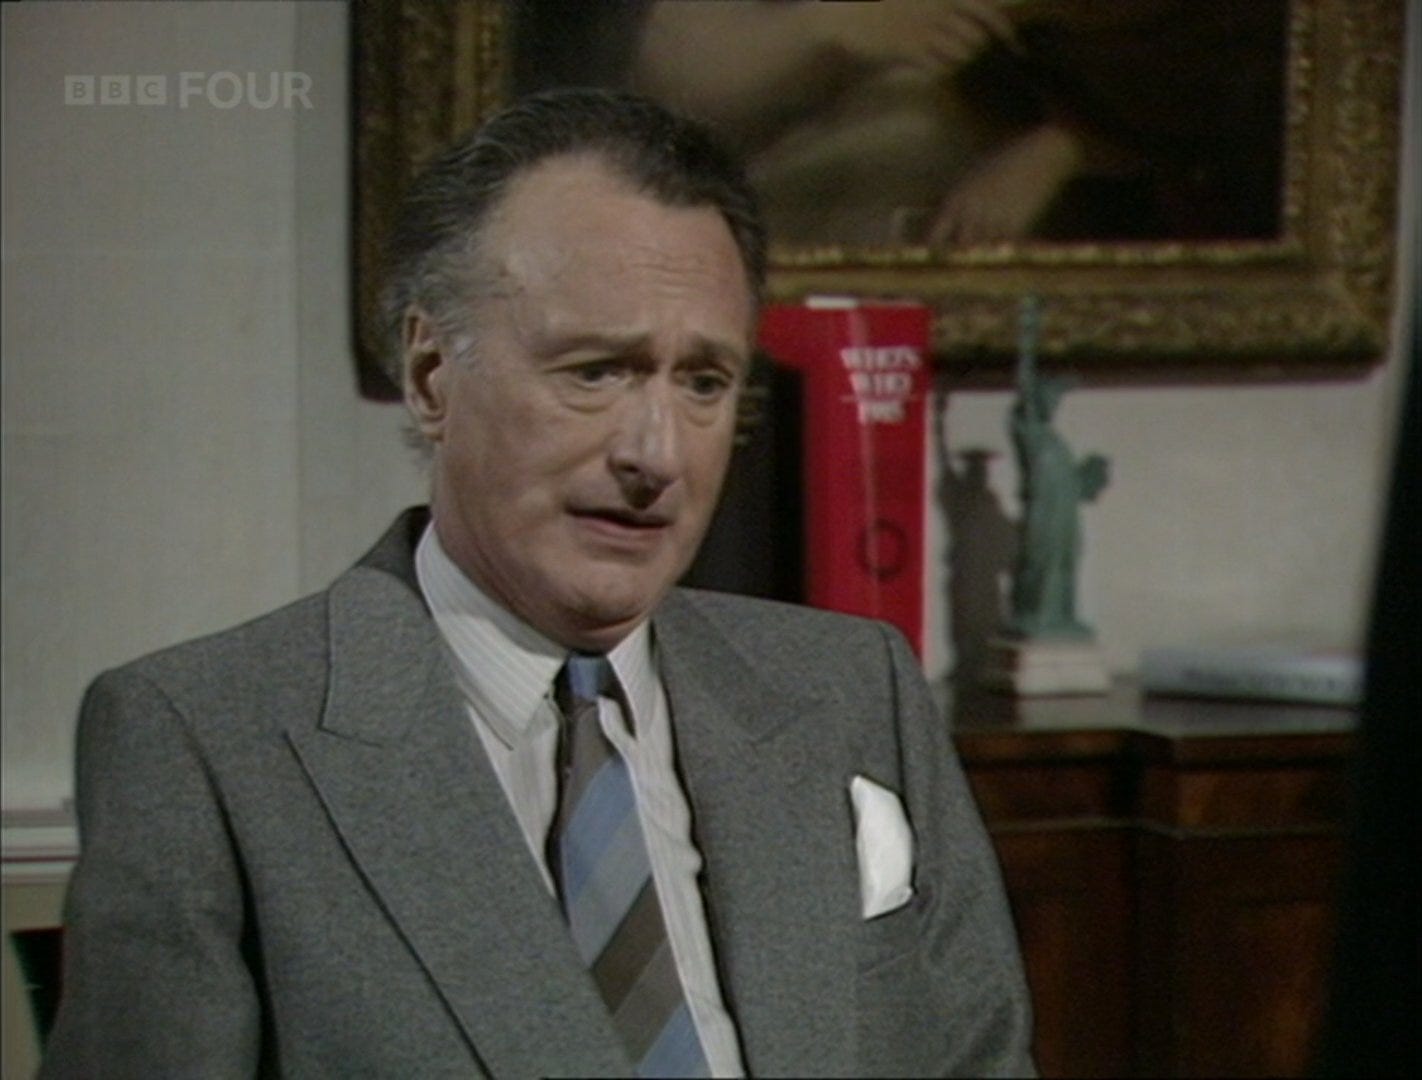 Yes, Prime Minister" The Ministerial Broadcast (TV Episode 1986) - IMDb